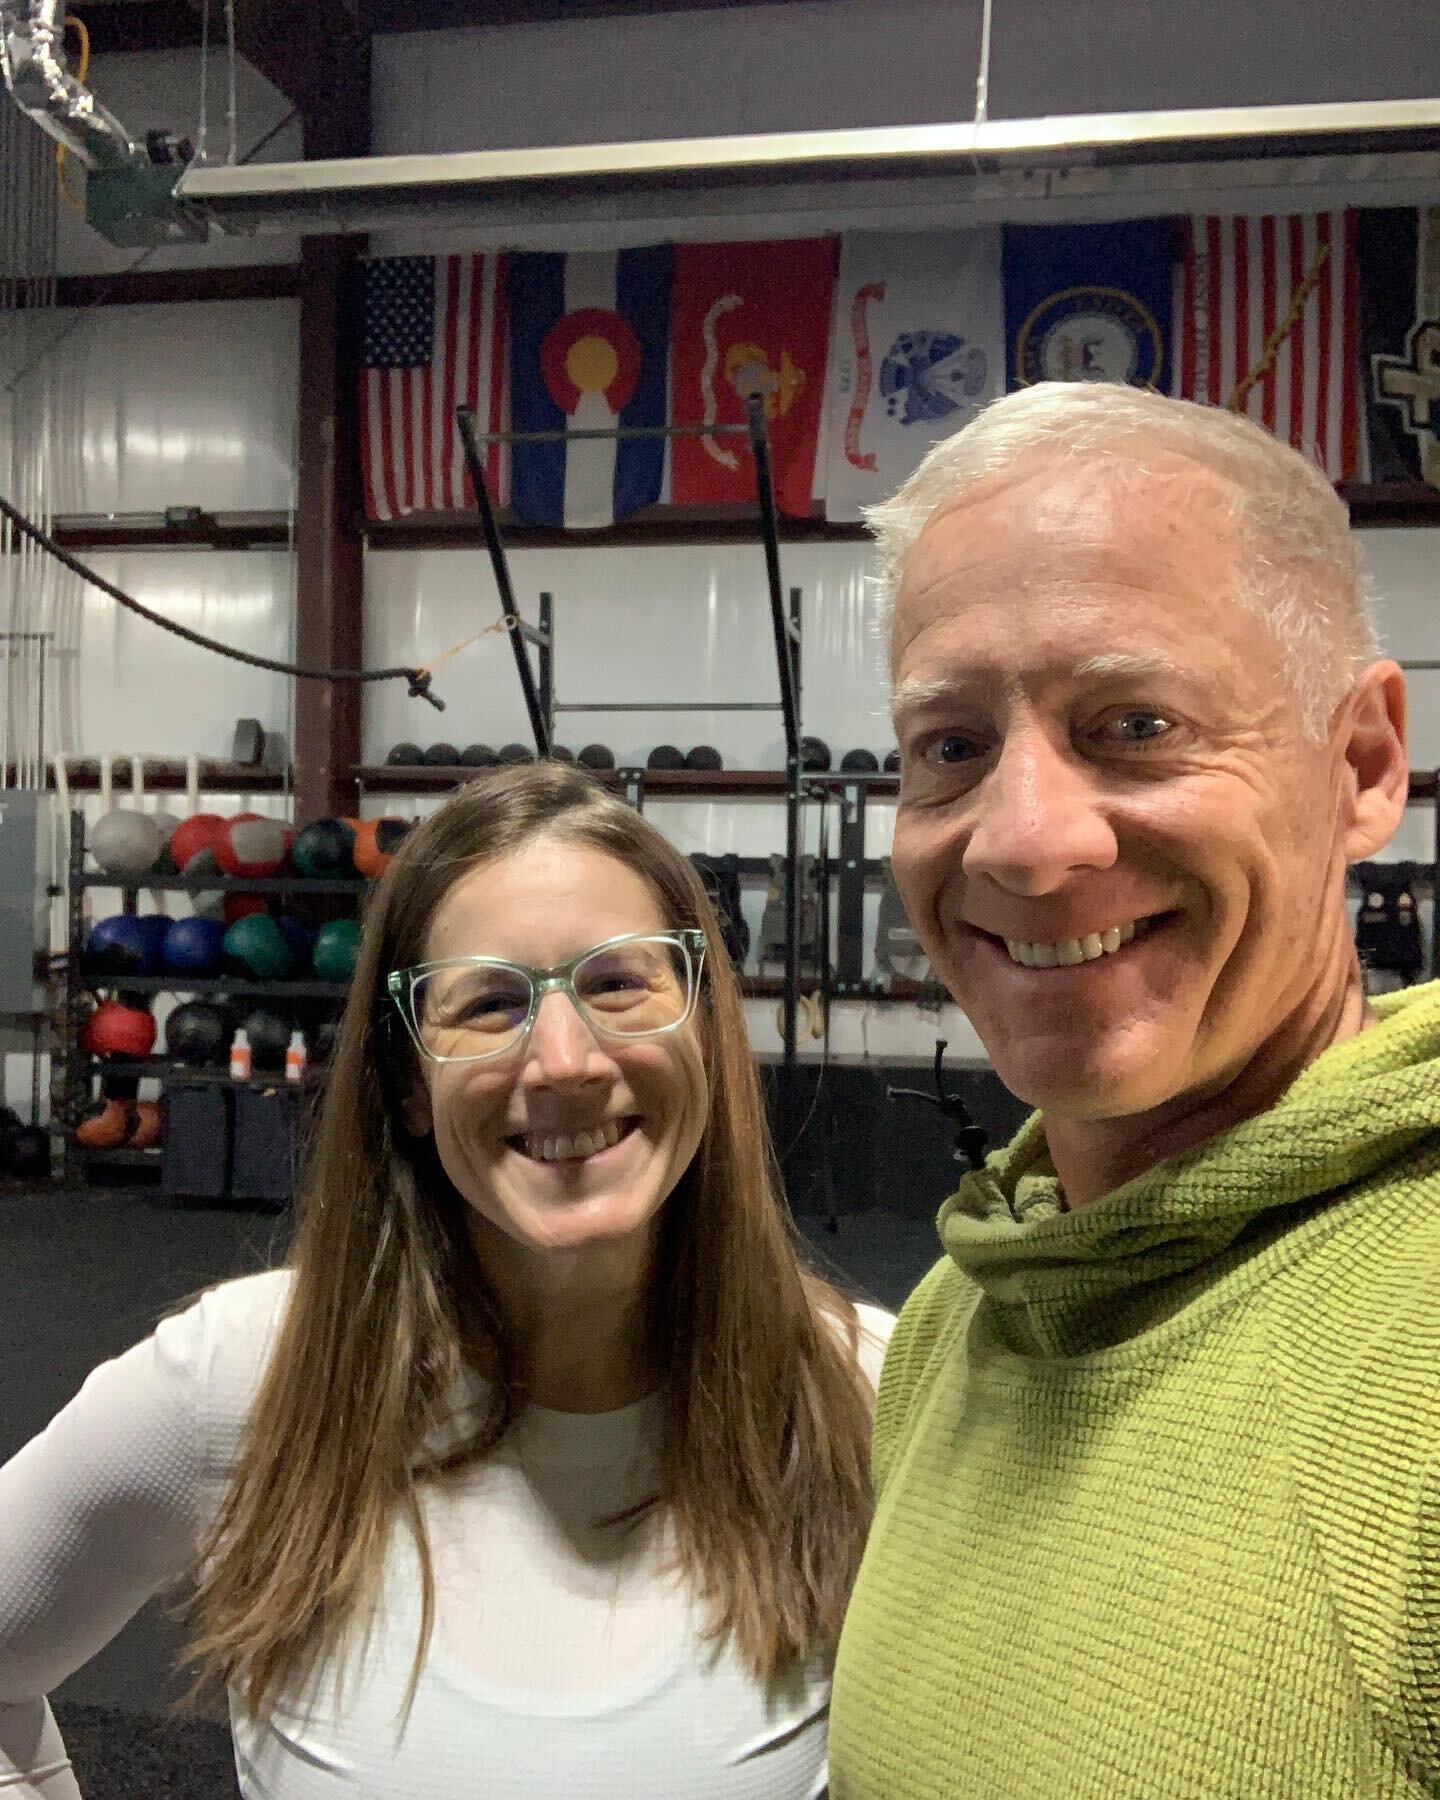 Recovery is the biggest part of training for fitness. Thank you @cycleboss57 for some serious restoration Al yoga at @crossfit_mafia. #resilience #mentalfitness #fitness